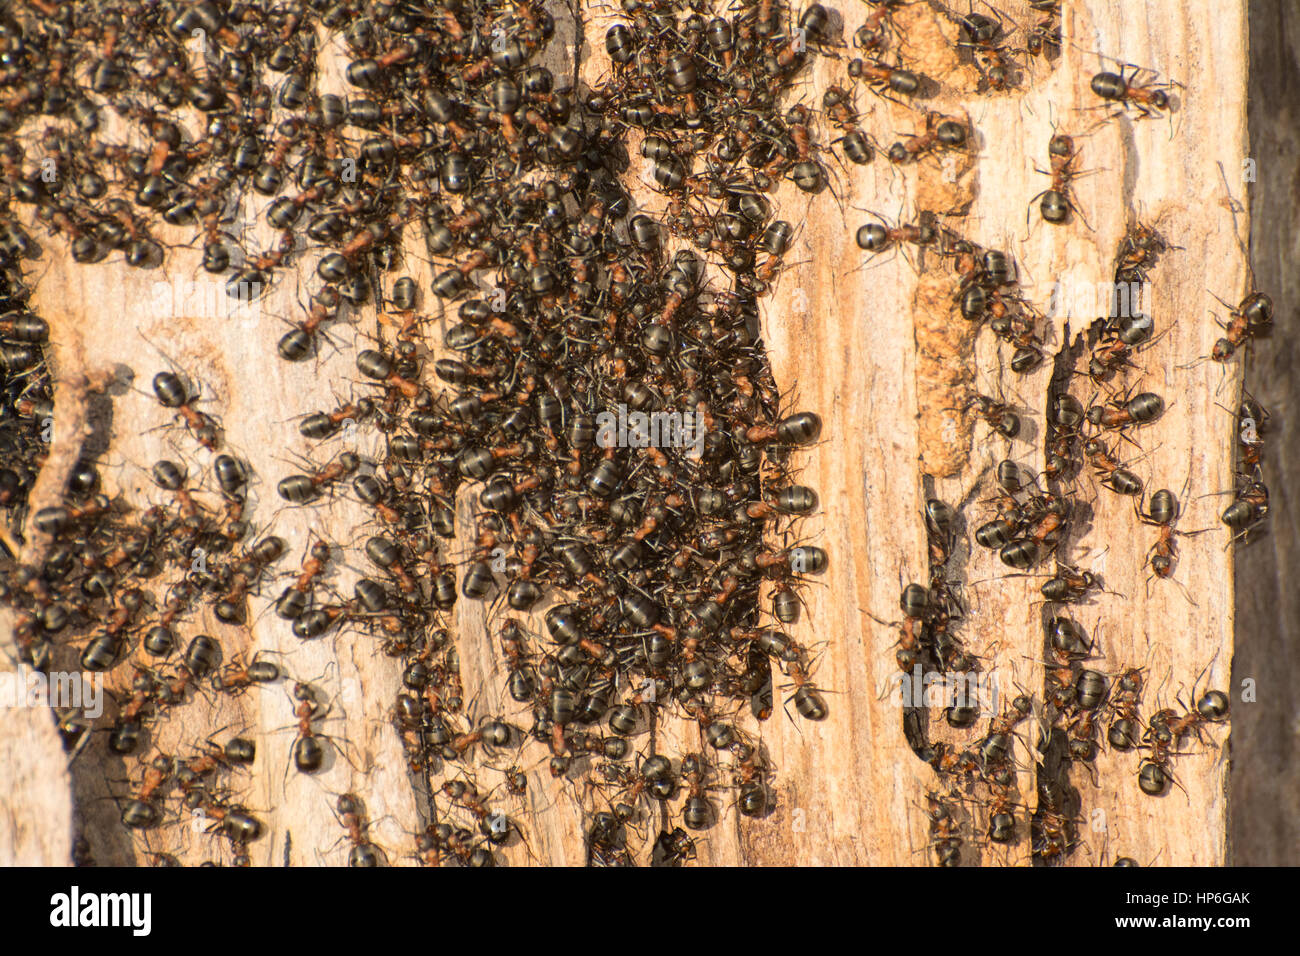 Wood ant (Formica rufa) colony on dead tree trunk Stock Photo